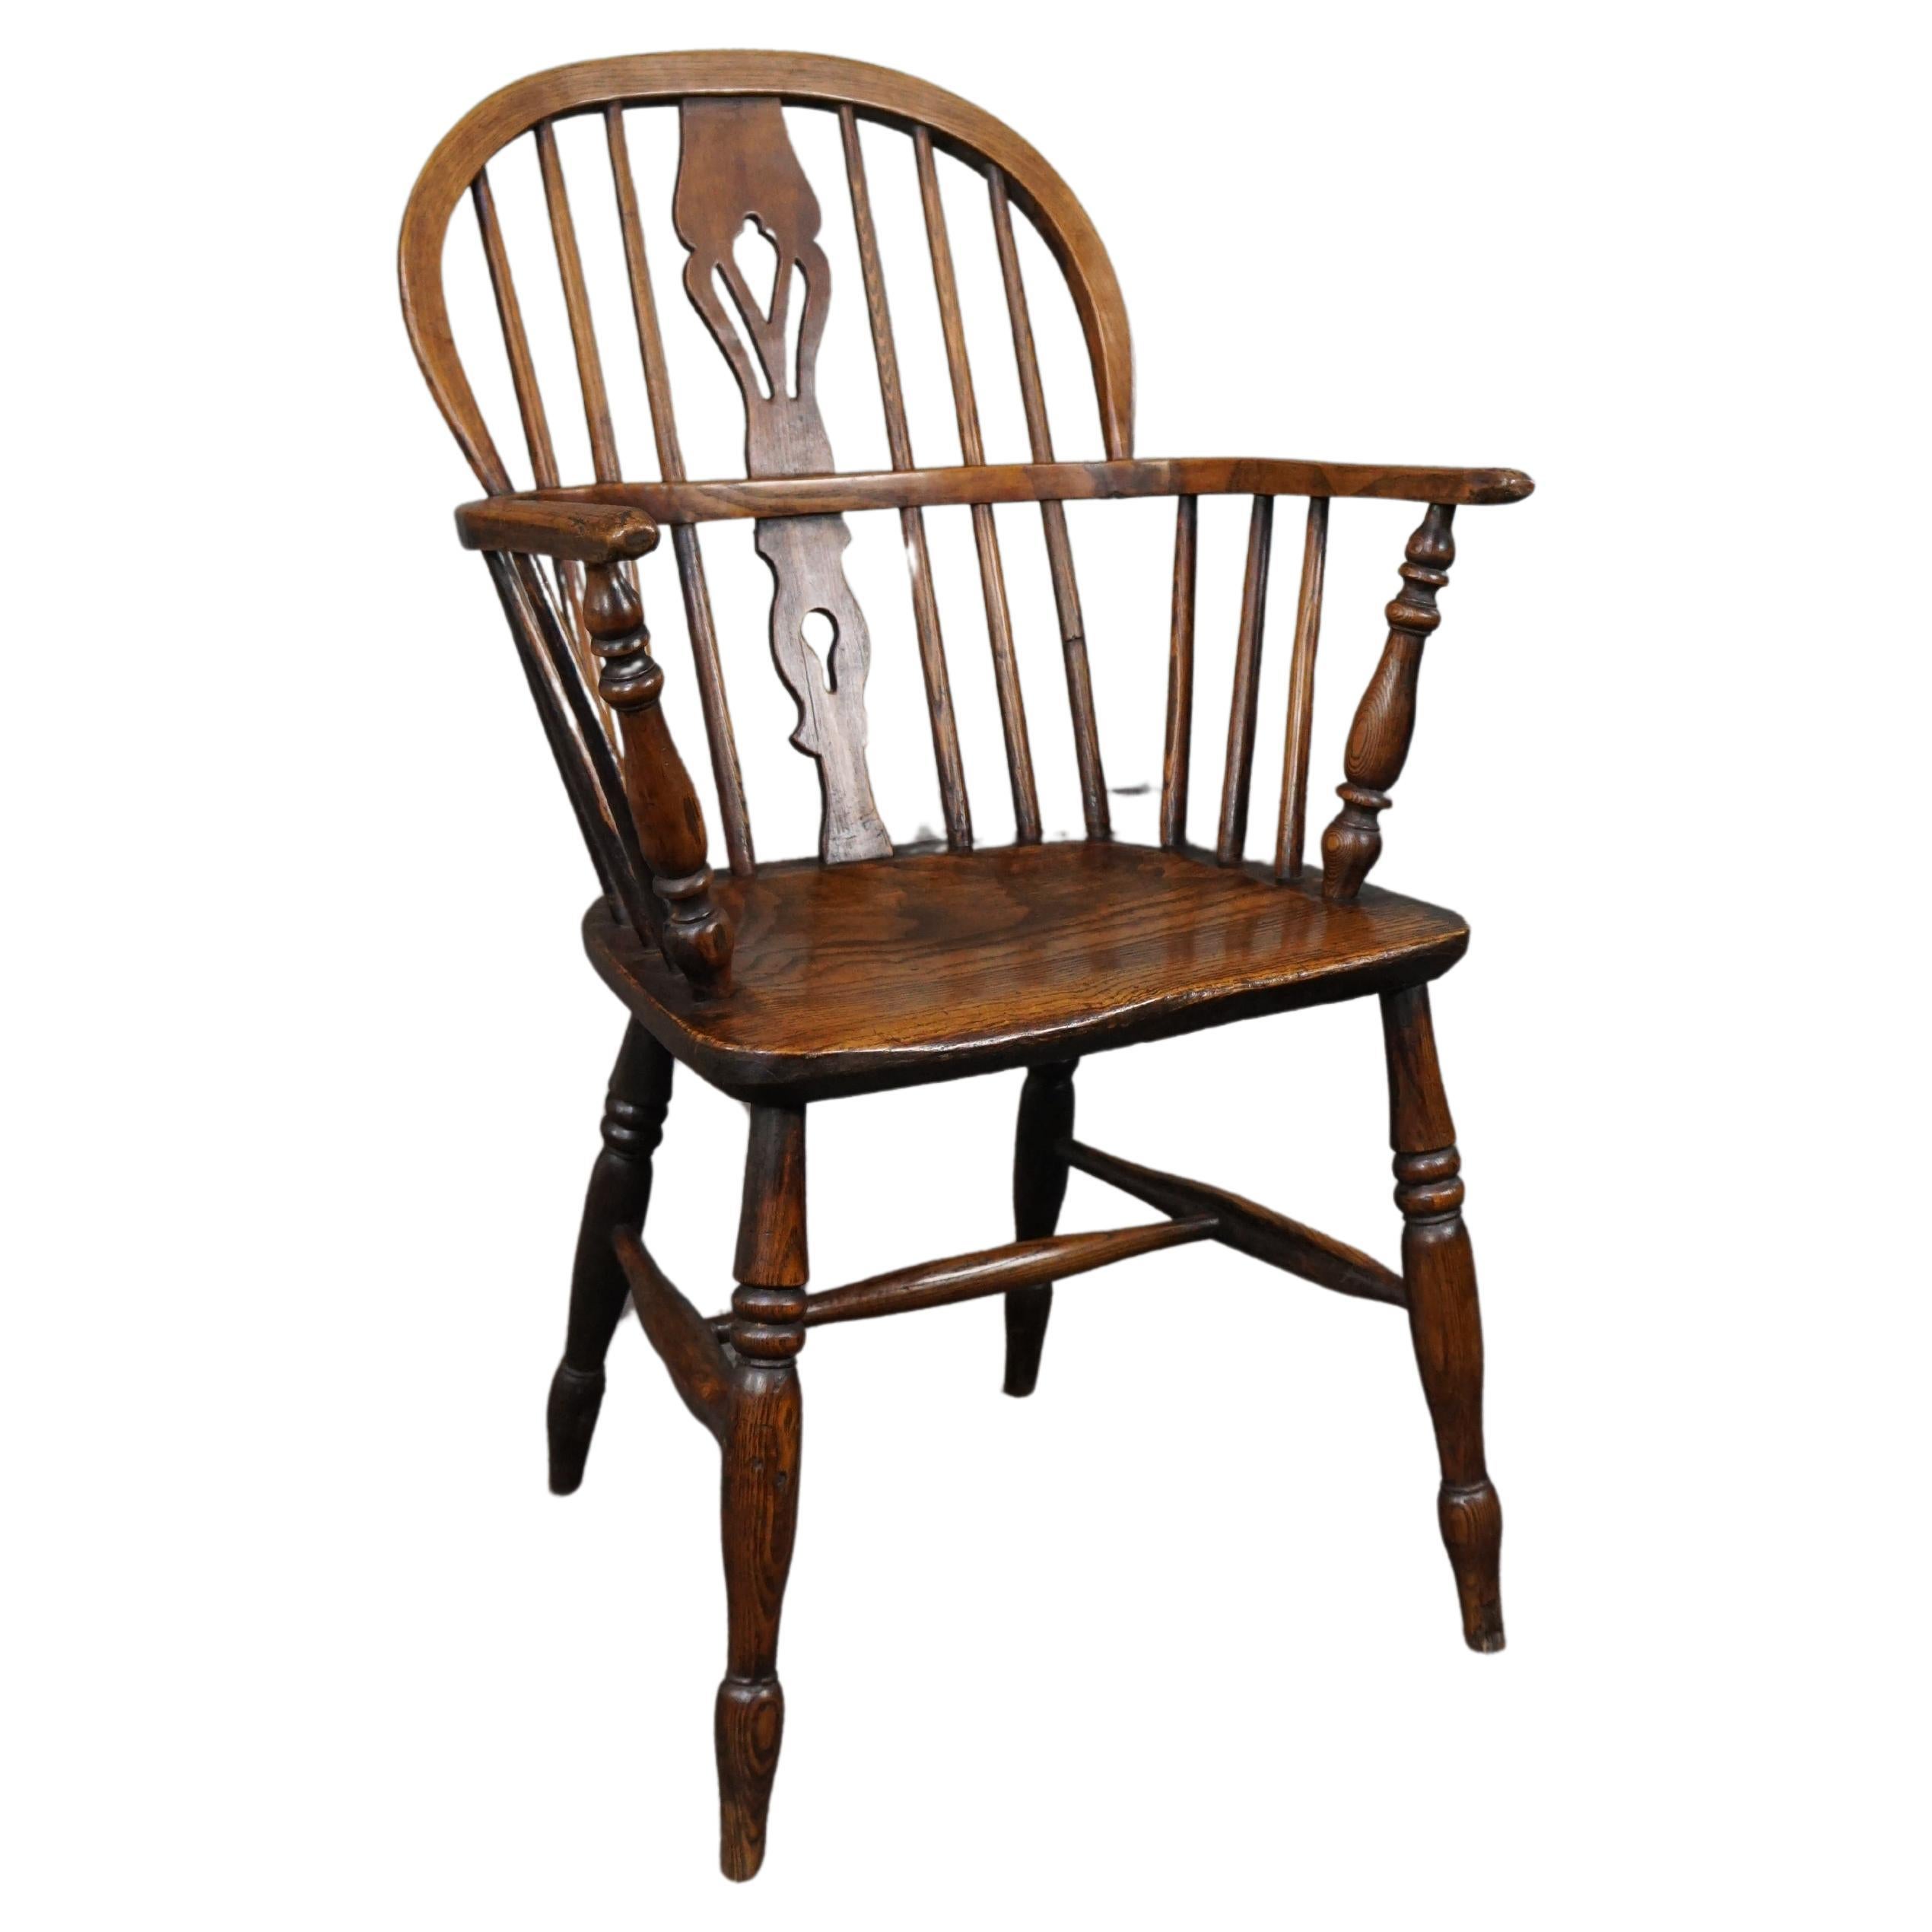 Antique Windsor armchair/chair, English Low Back, 18th century For Sale